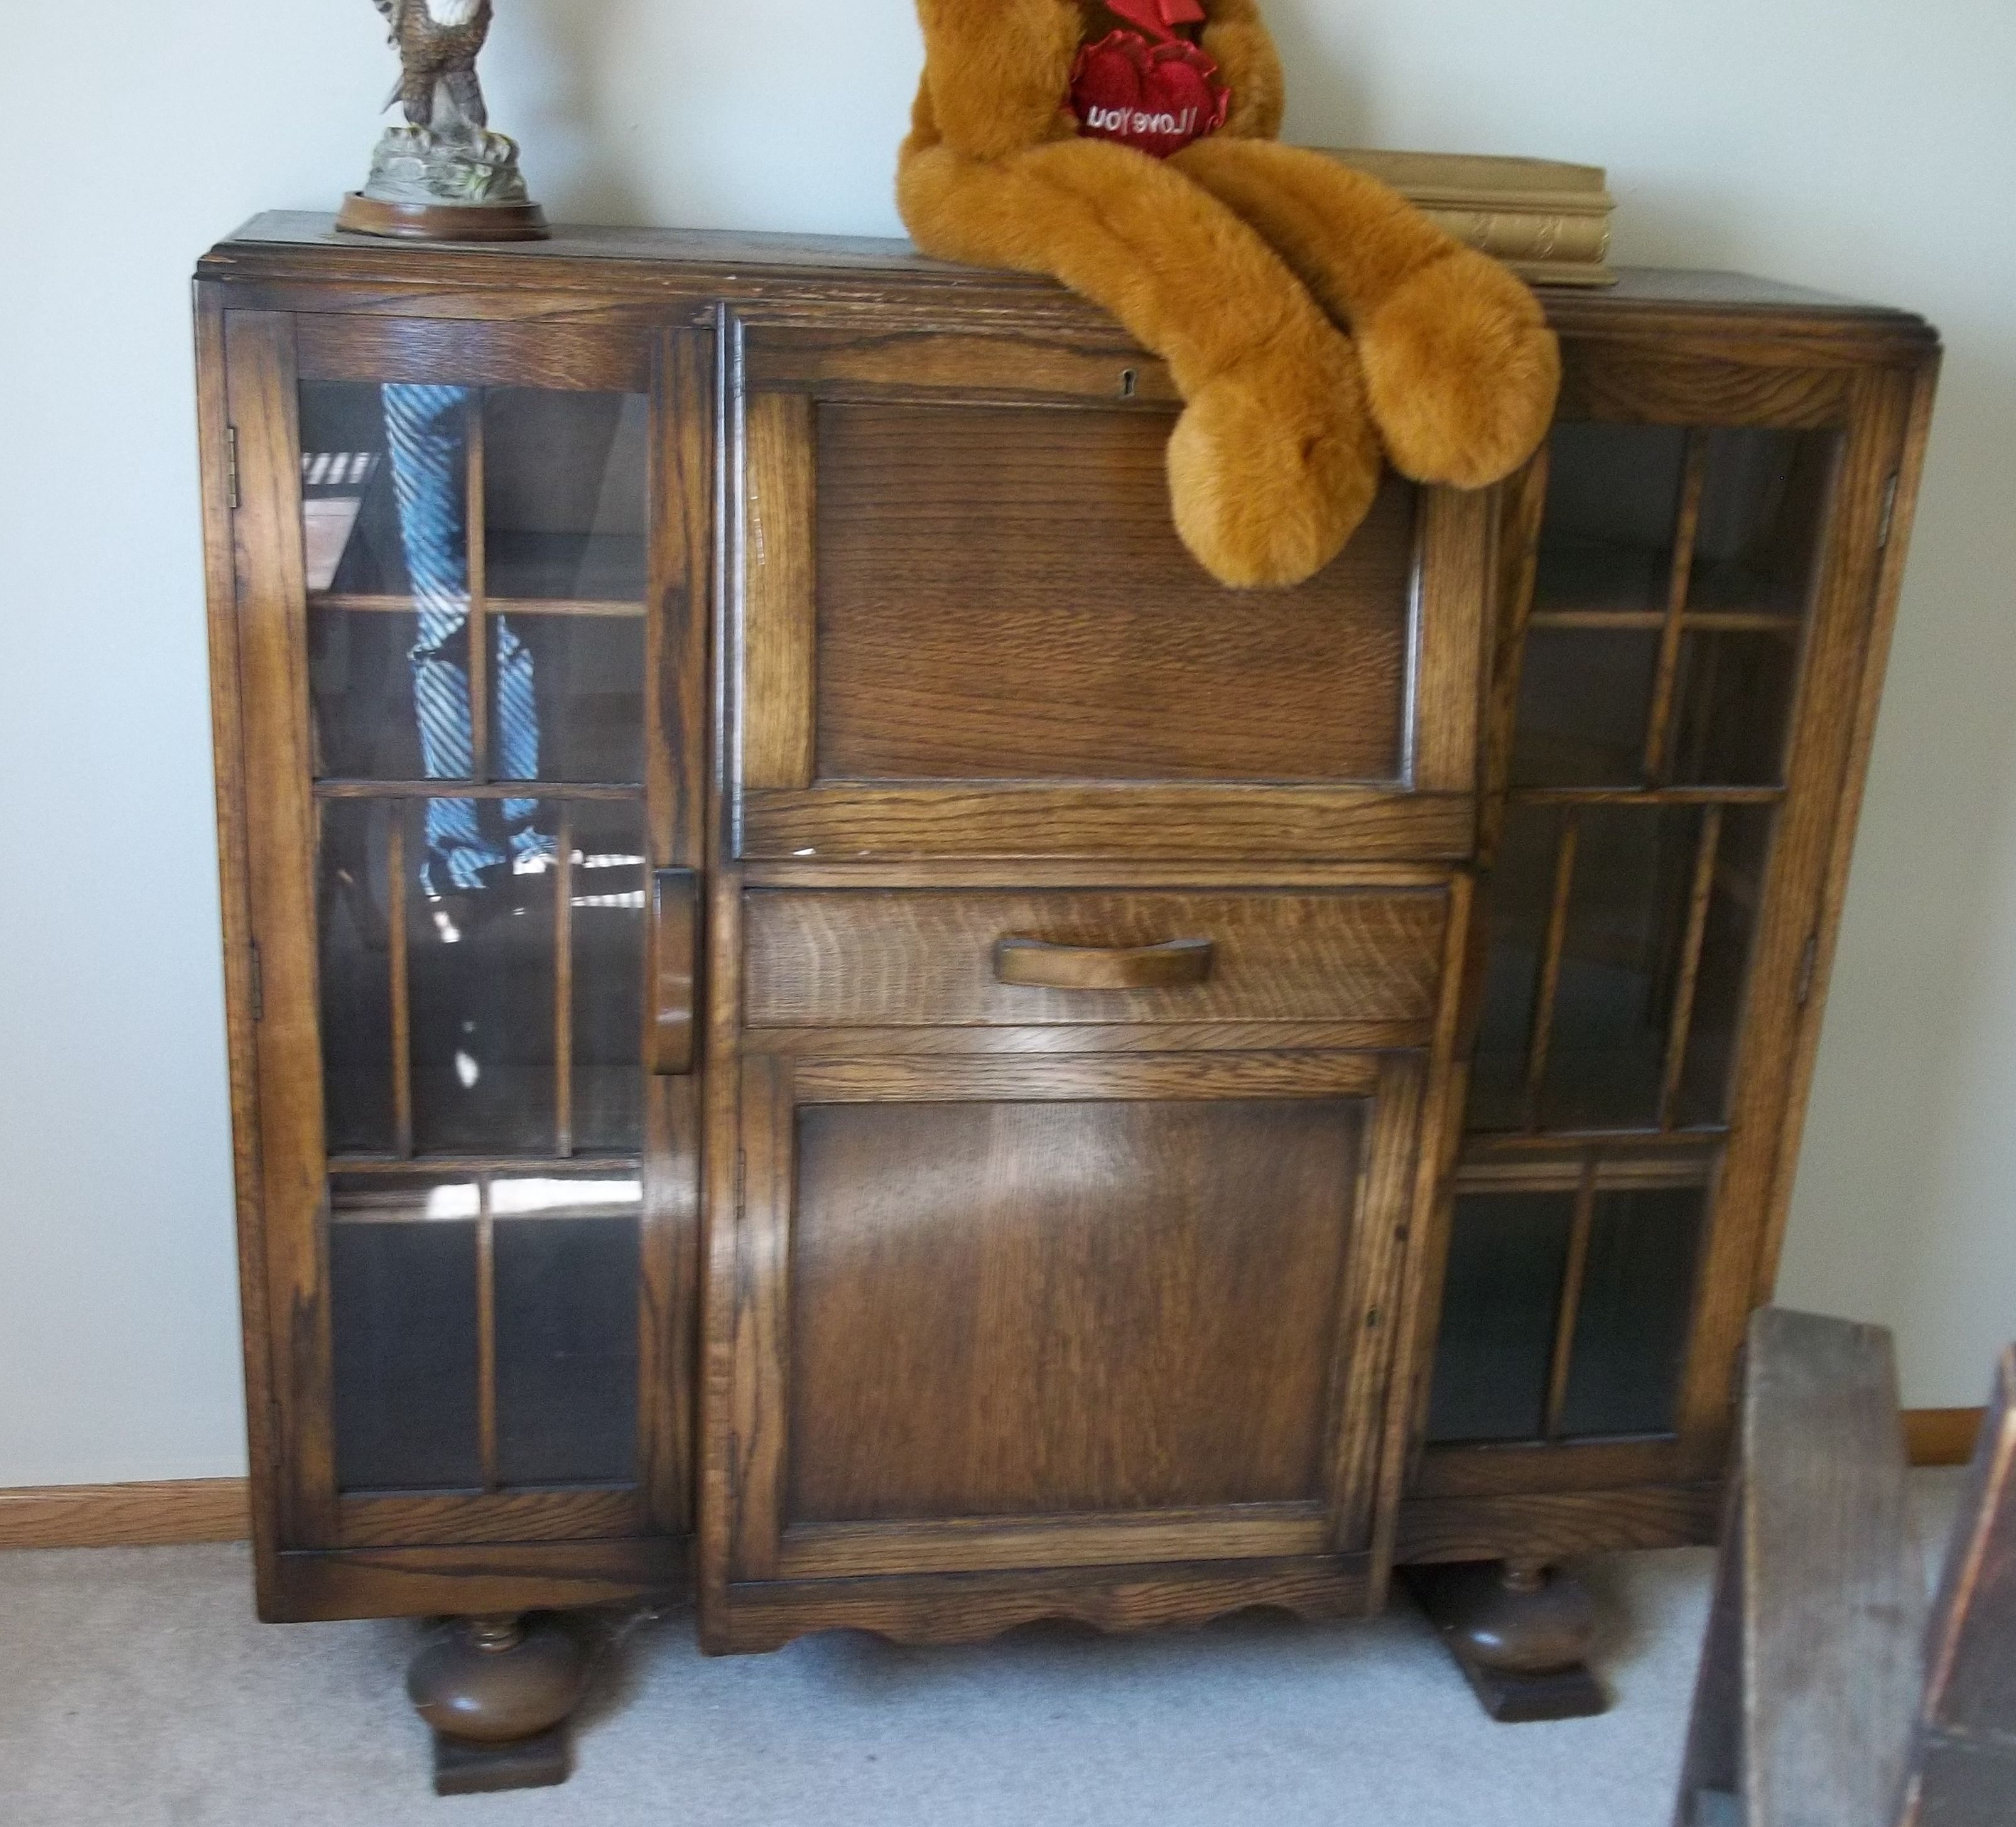 Most Recent Antique Break Front Secretary Desk Bookcase Display Cabinet For Inside Antique Secretary Desk With Bookcases (View 4 of 15)